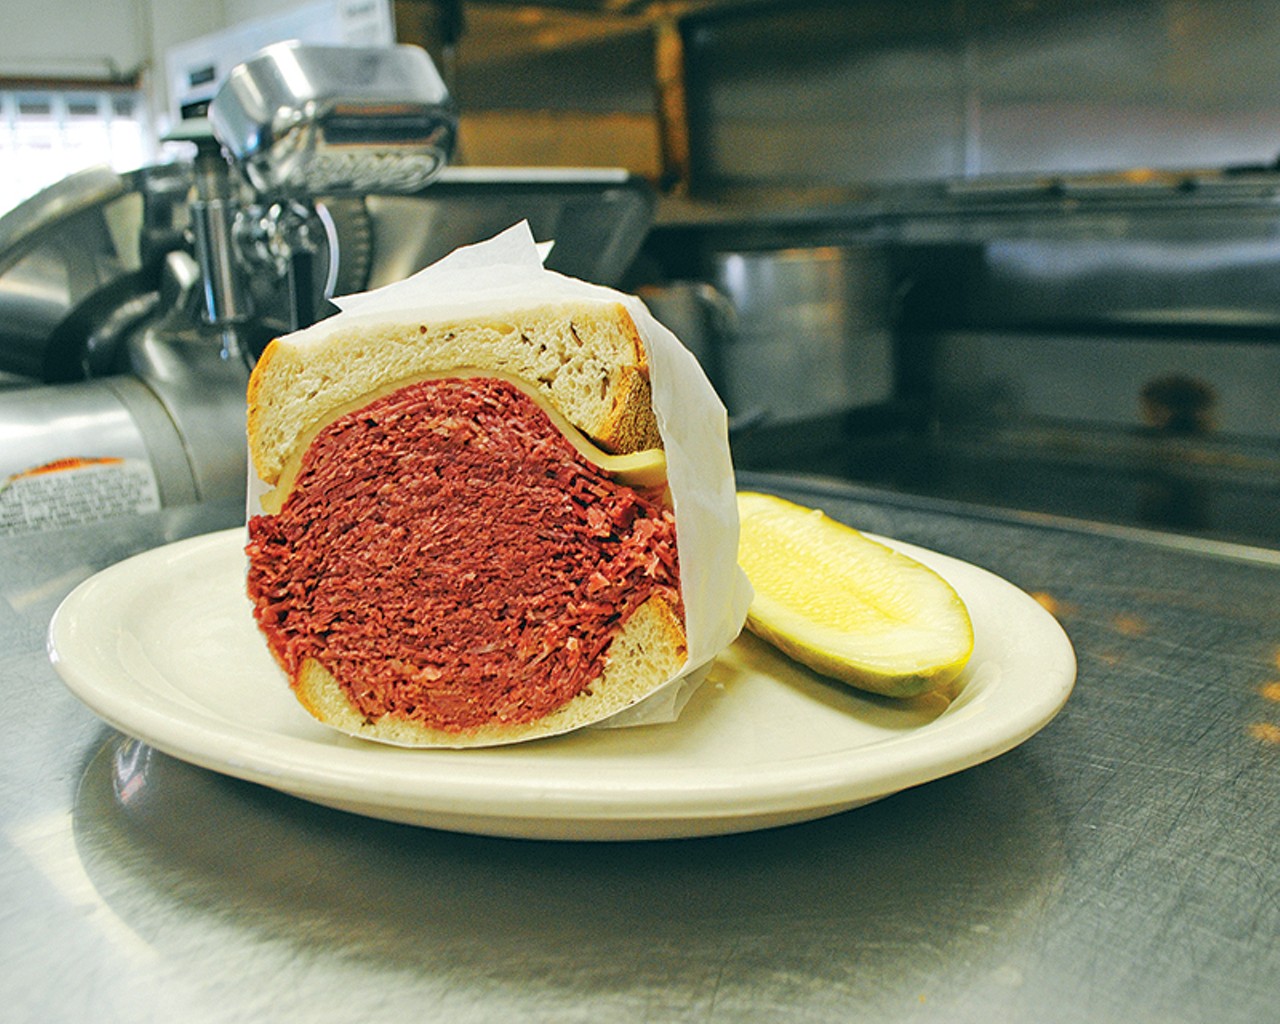  Slyman&#146;s Corned Beef
If you can open your mouth big enough to eat a Slyman&#146;s corned beef sandwich, you must be a Clevelander. 
Photo via Scene Archives